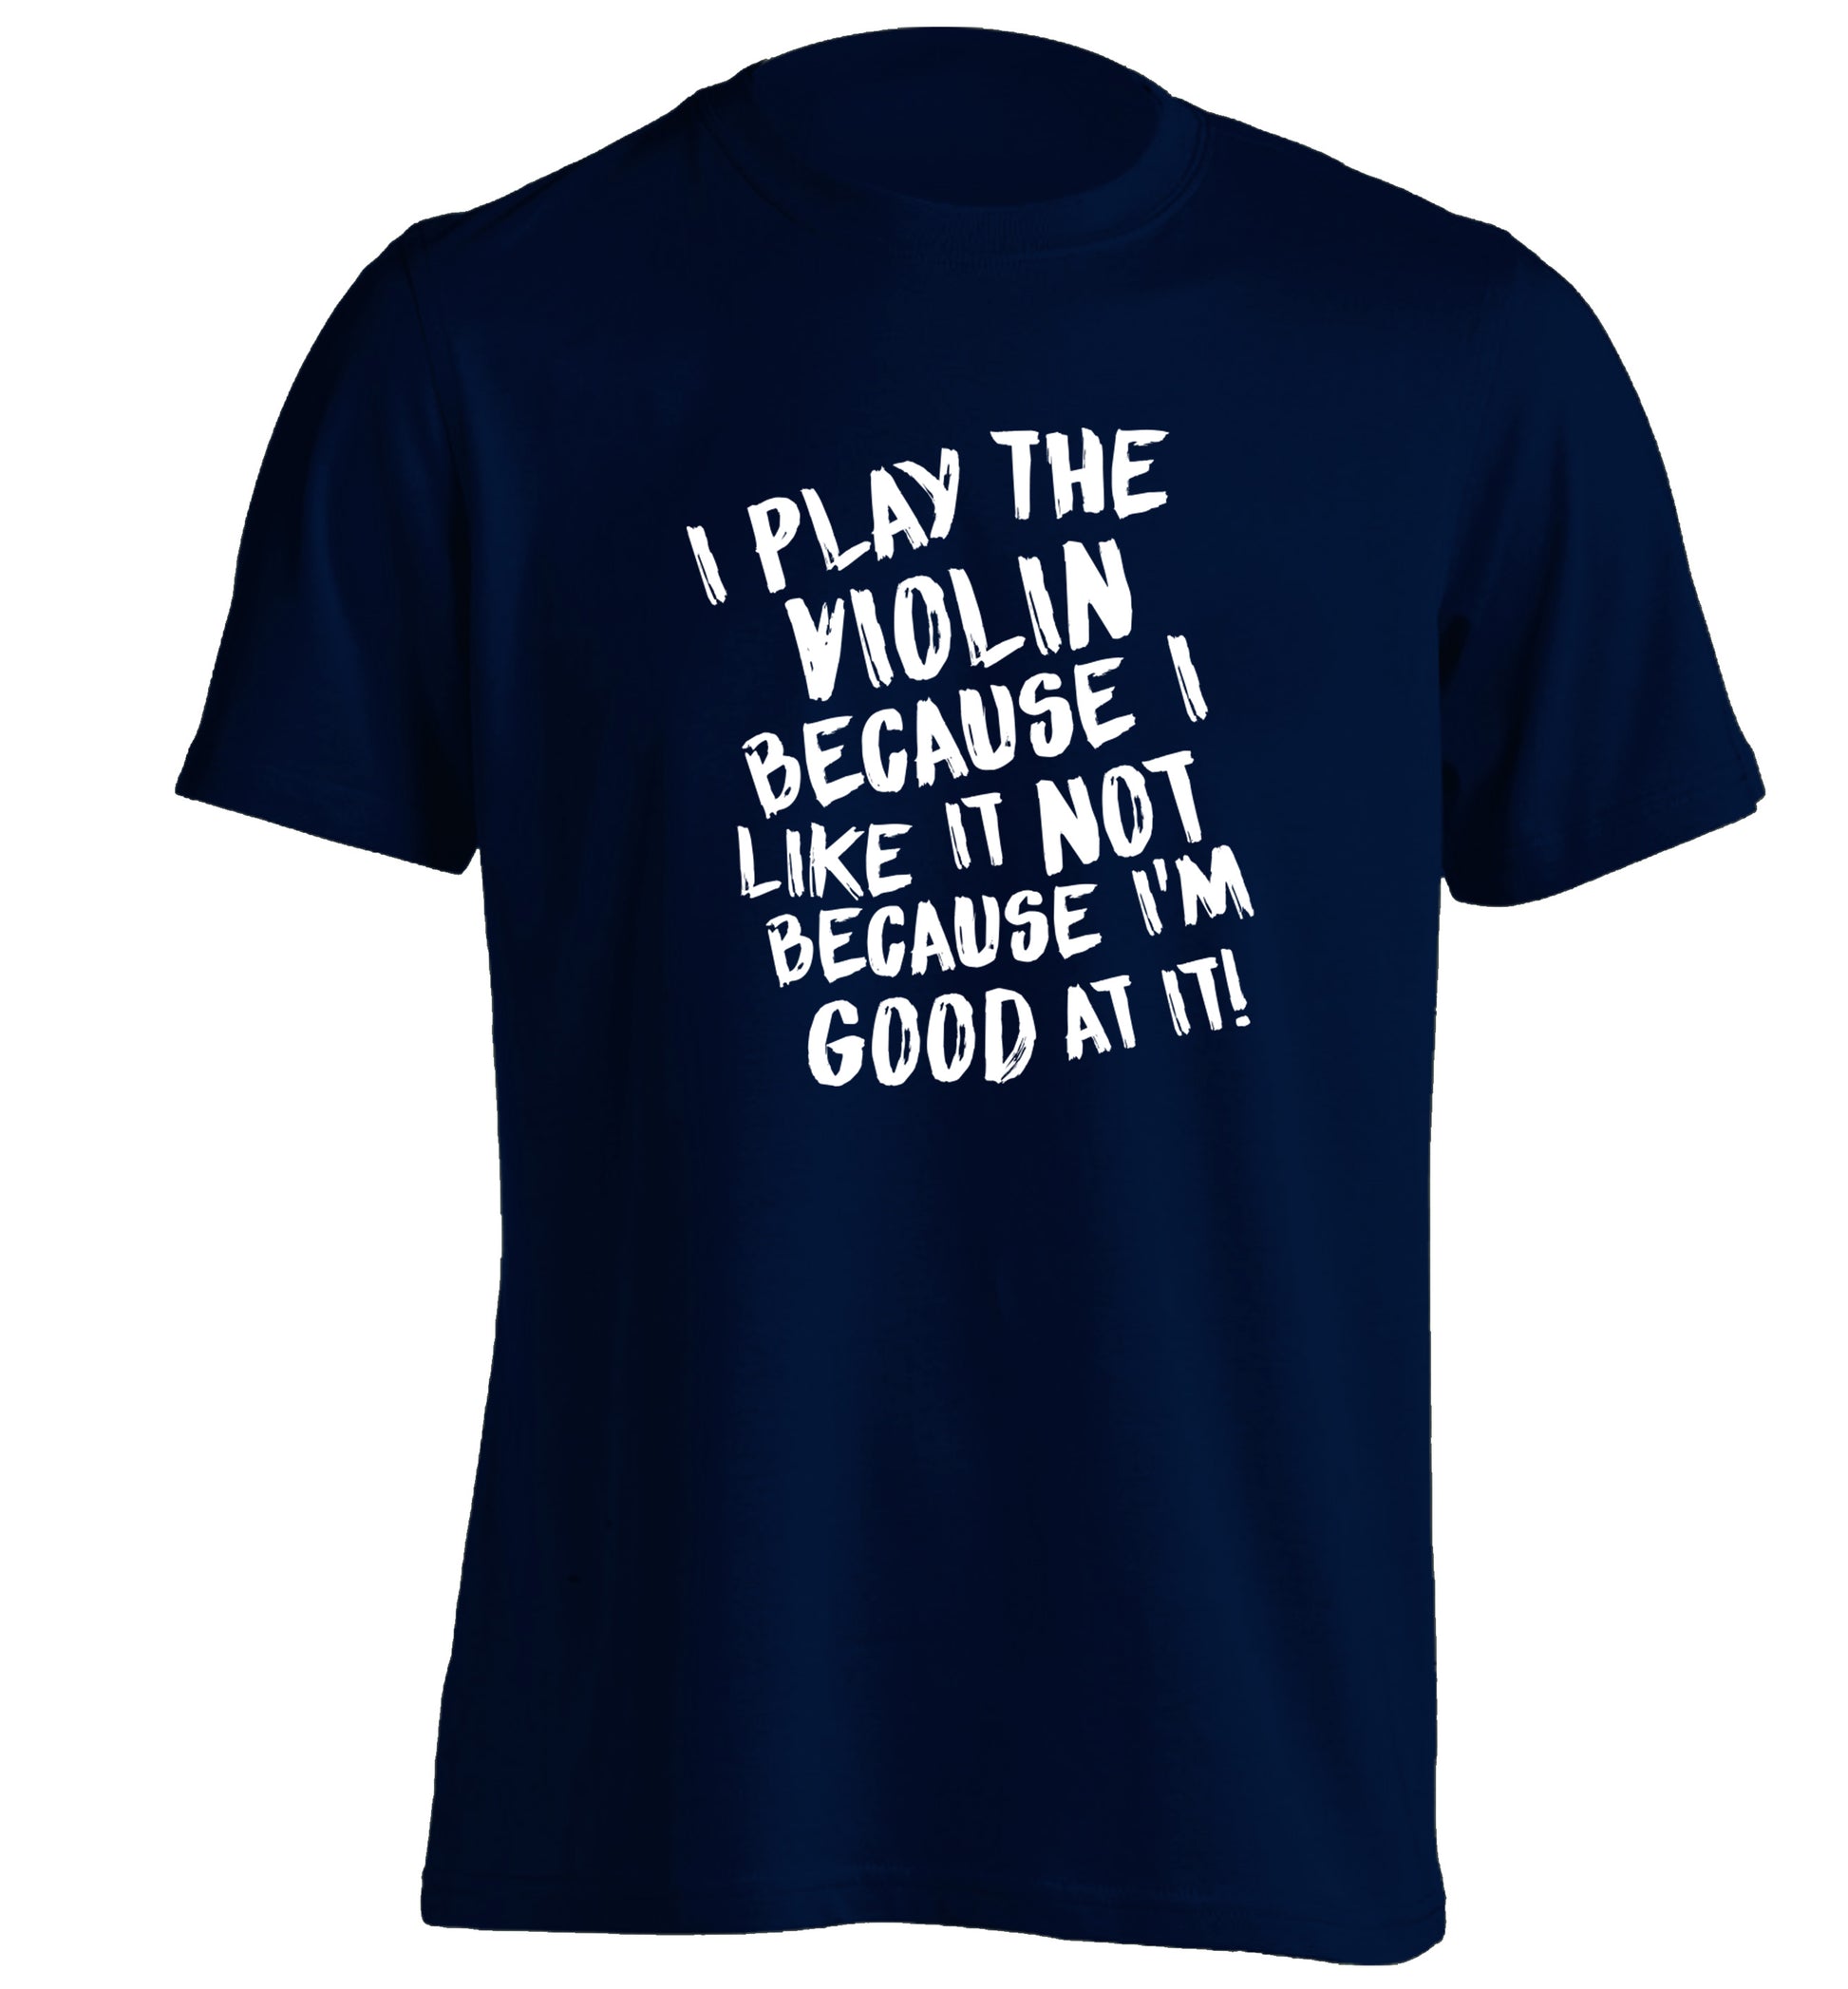 I play the violin because I like it not because I'm good at it adults unisex navy Tshirt 2XL